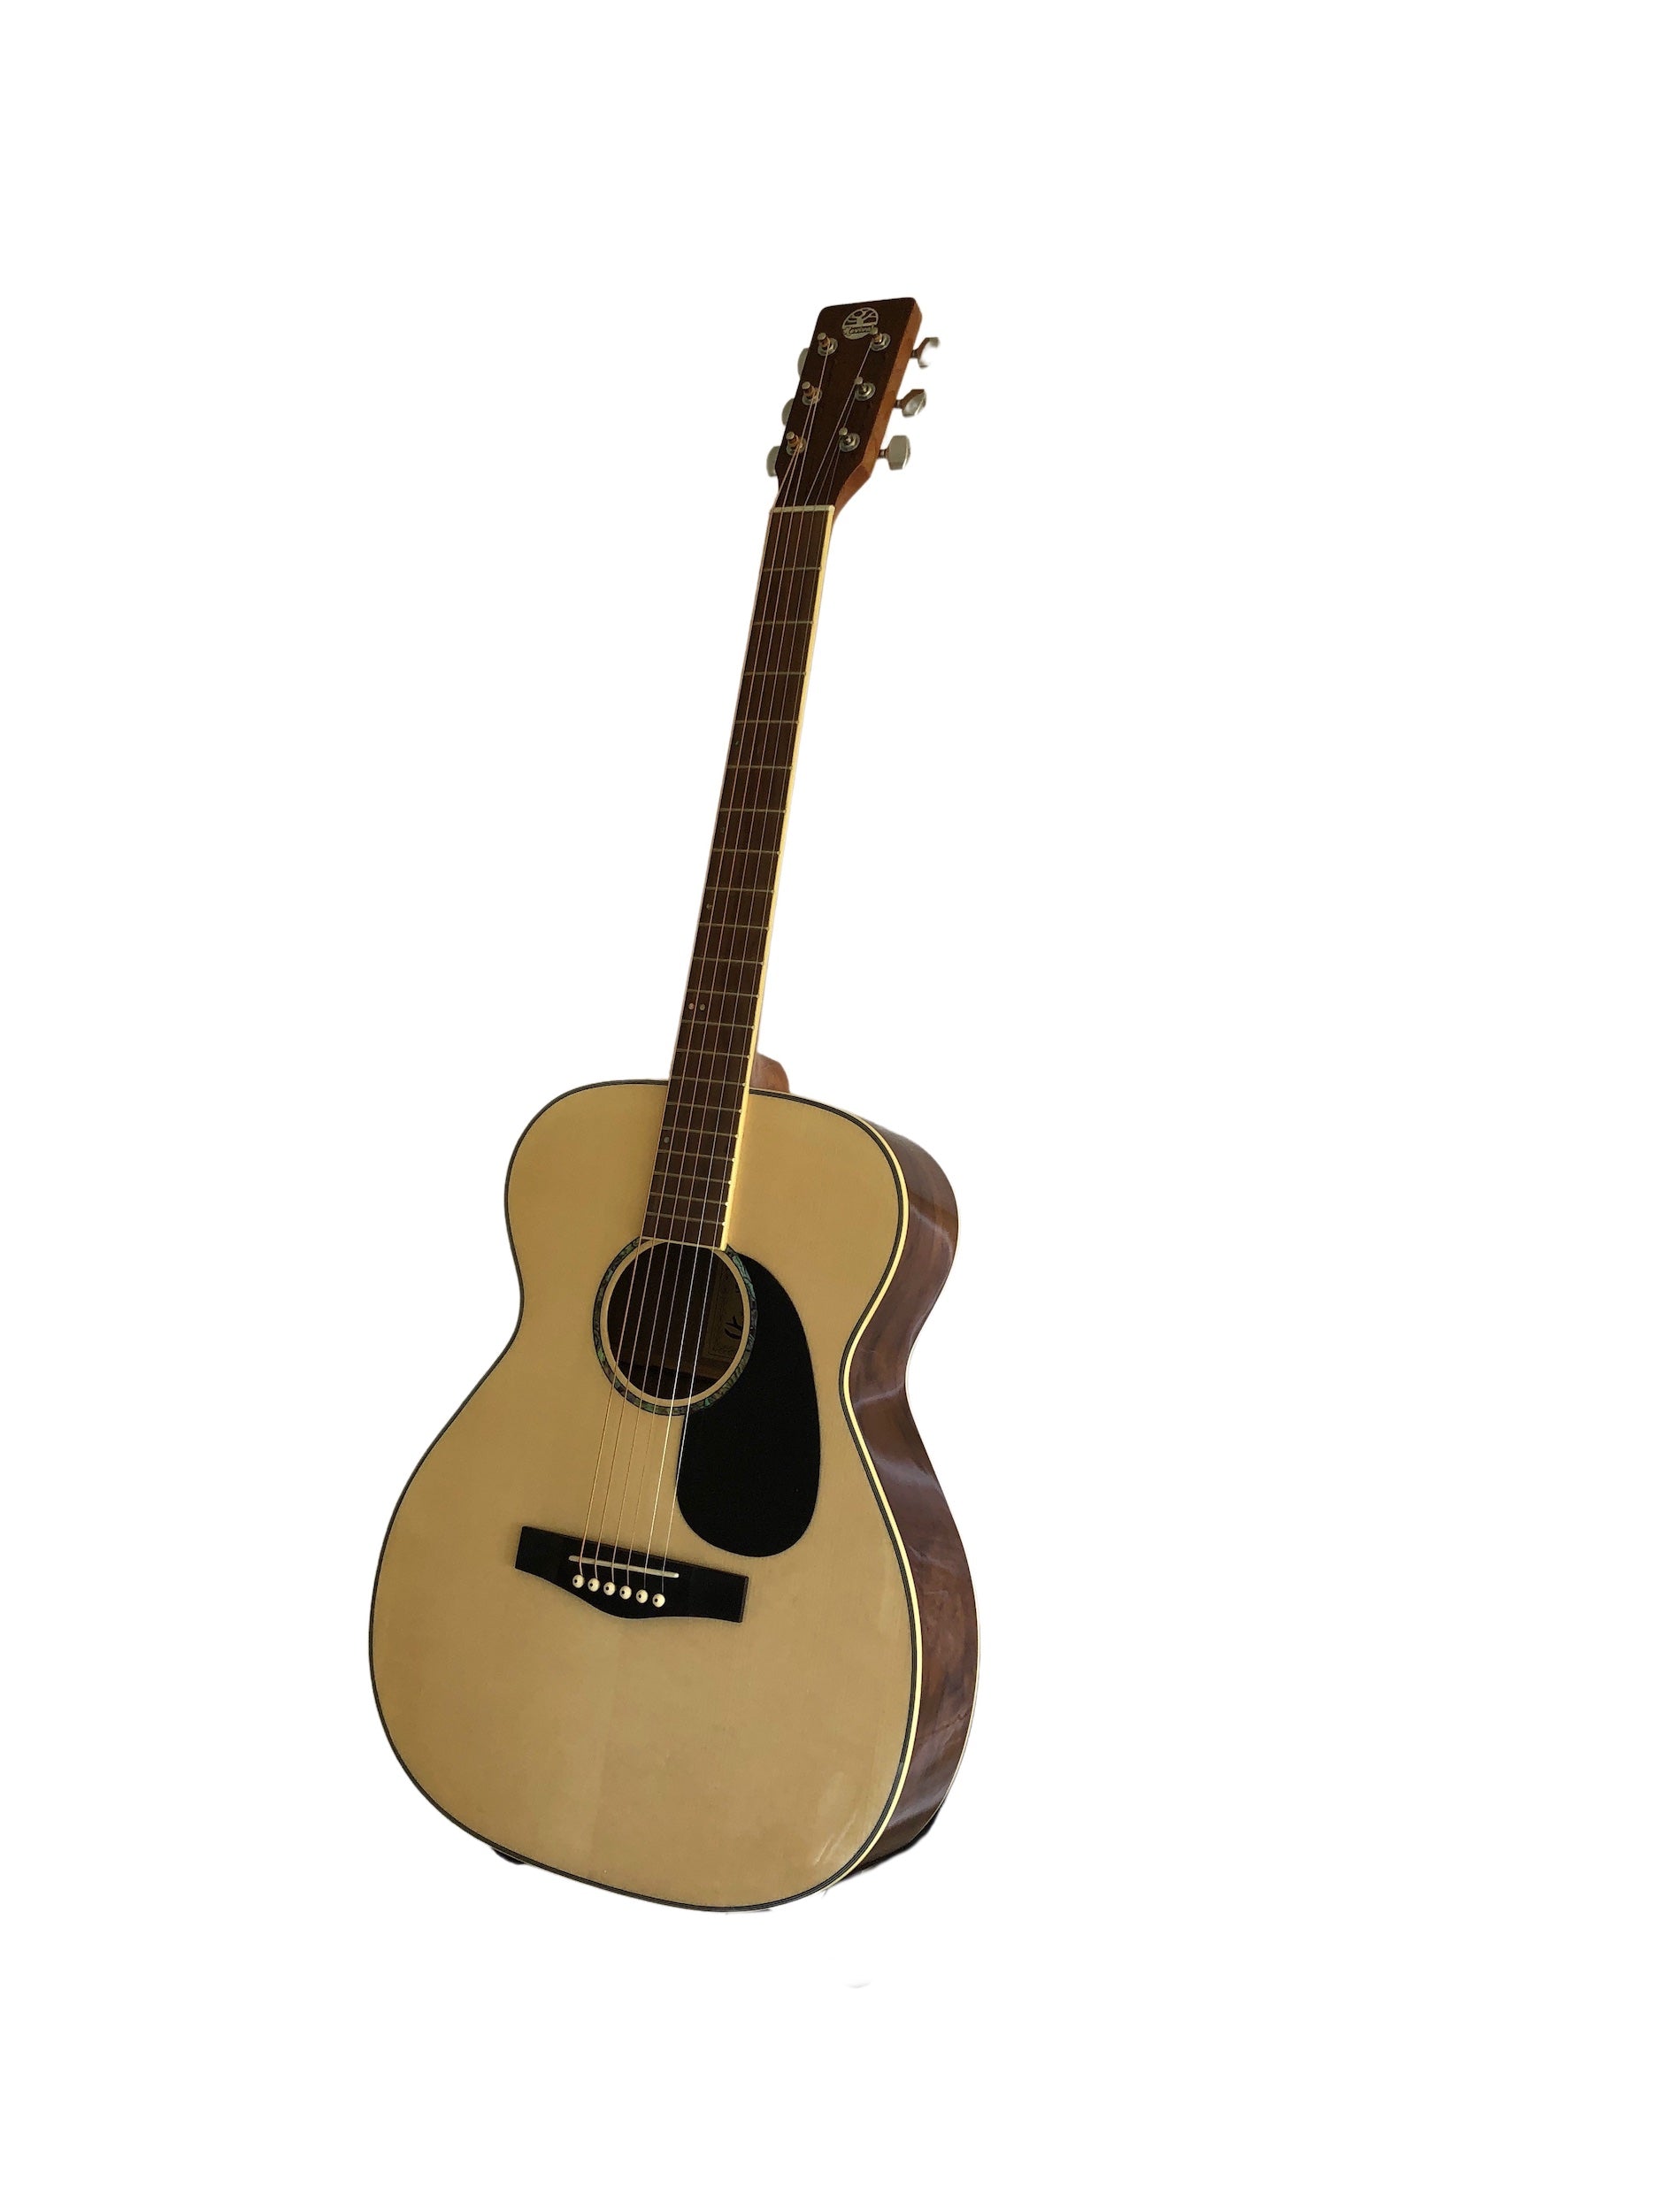 Photo of the Revival rg-25 acoustic guitar, from the front right.